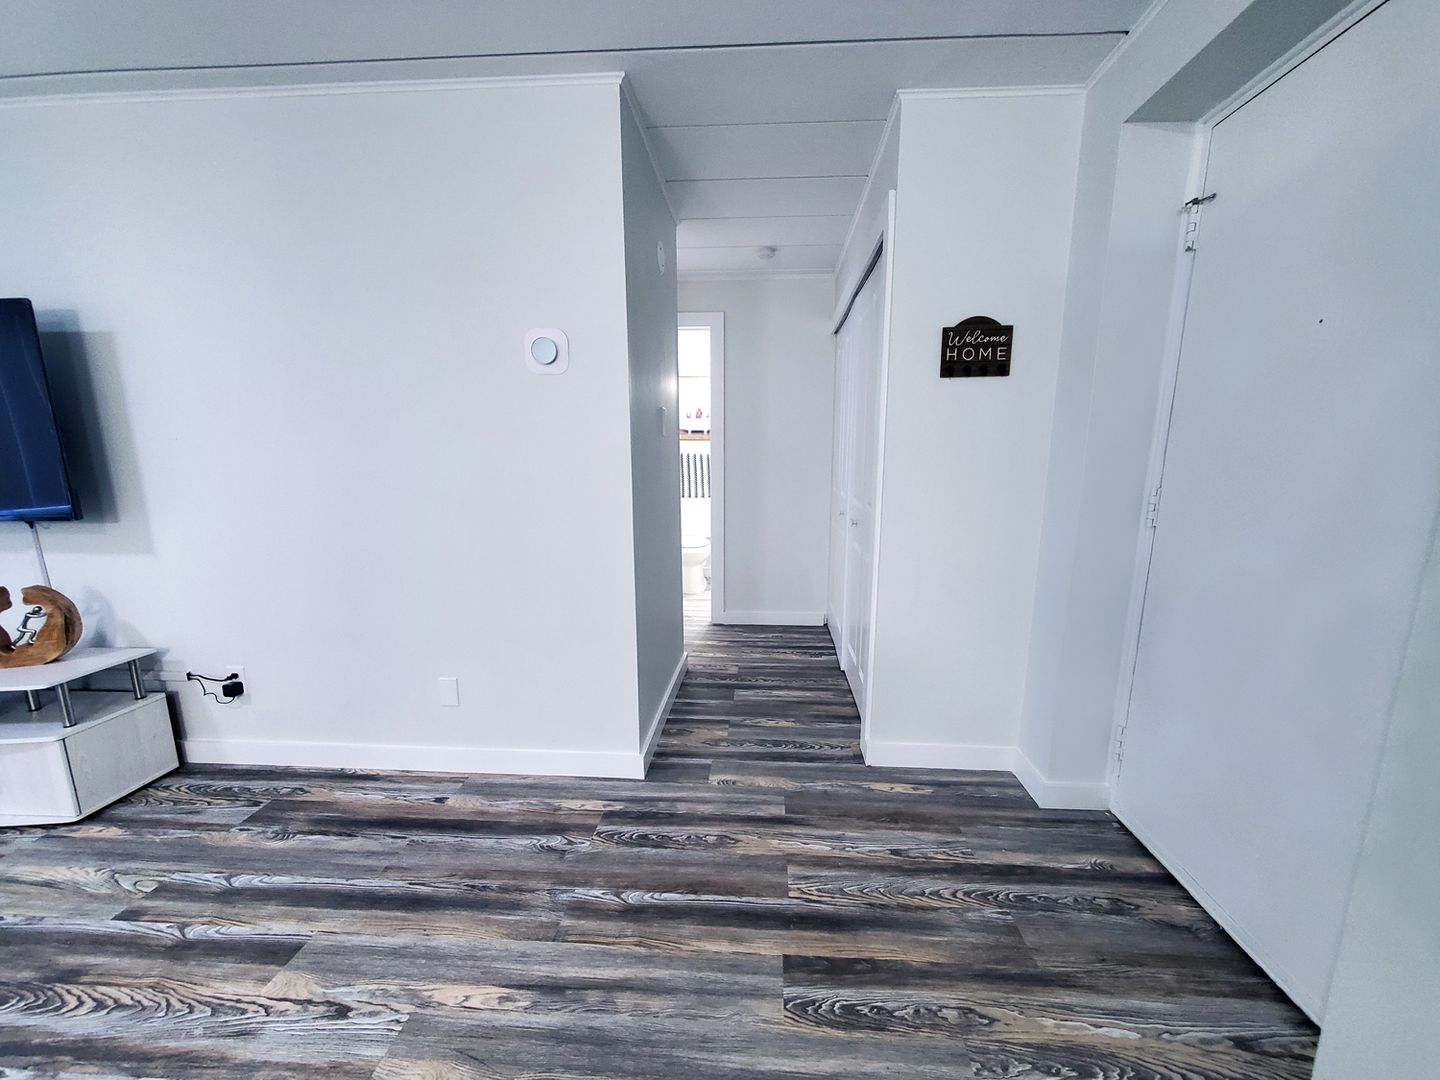 1 Bed and 1 Bath Apartments for Rent in Cleveland | Newly Renovated Image